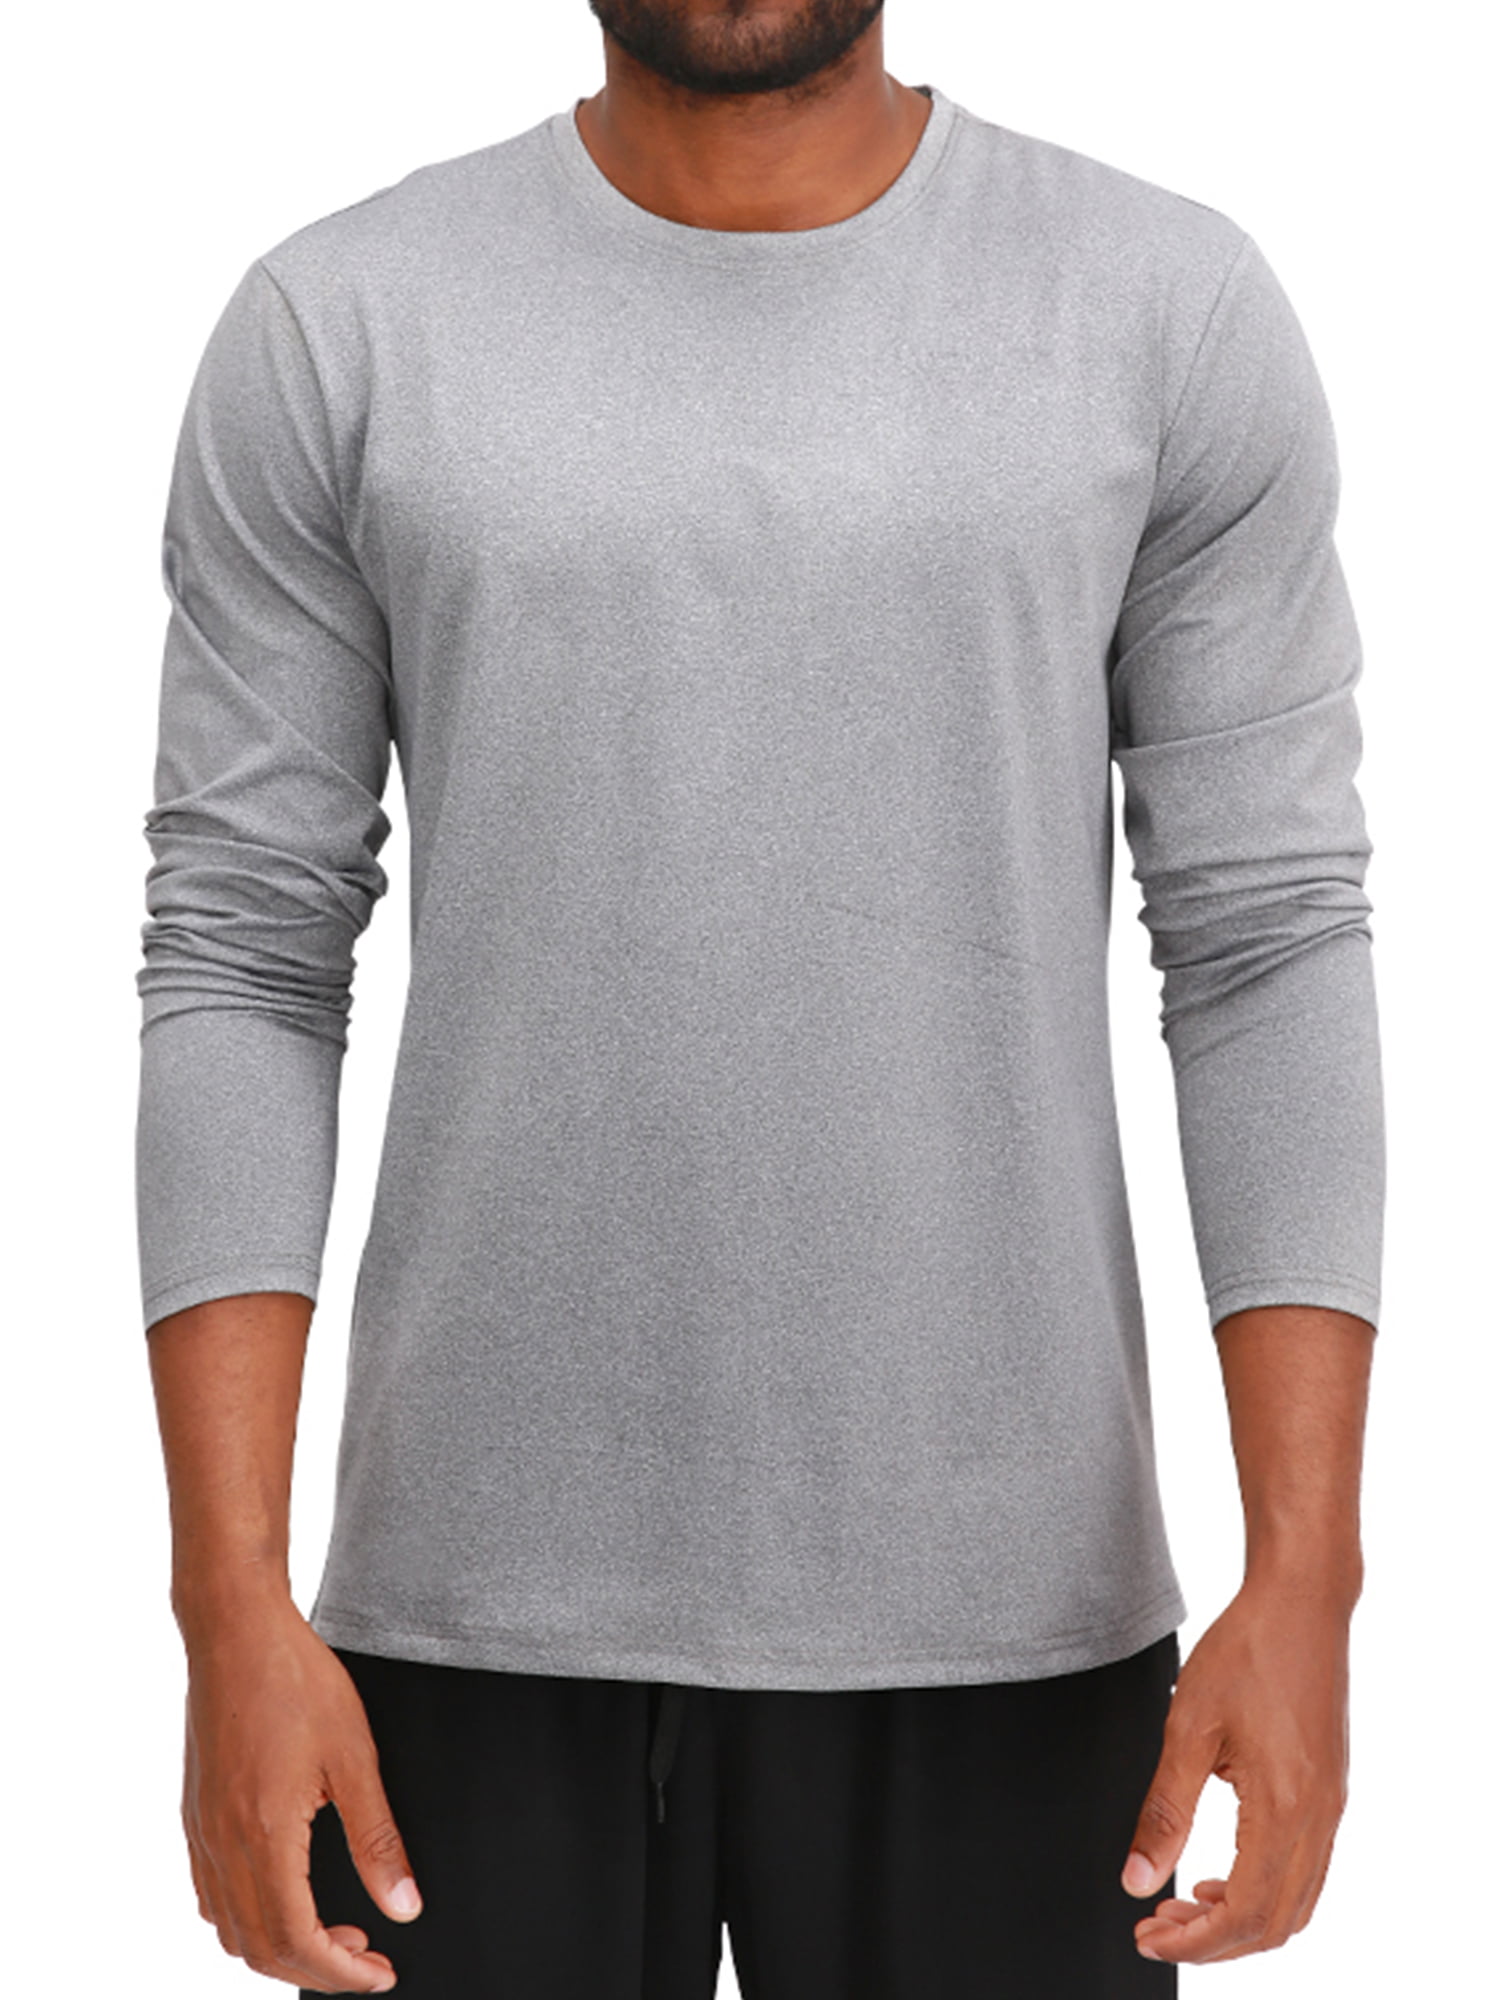 Men’s Crew Neck Dry-Fit Active Athletic T-Shirt Long Sleeve Workout ...